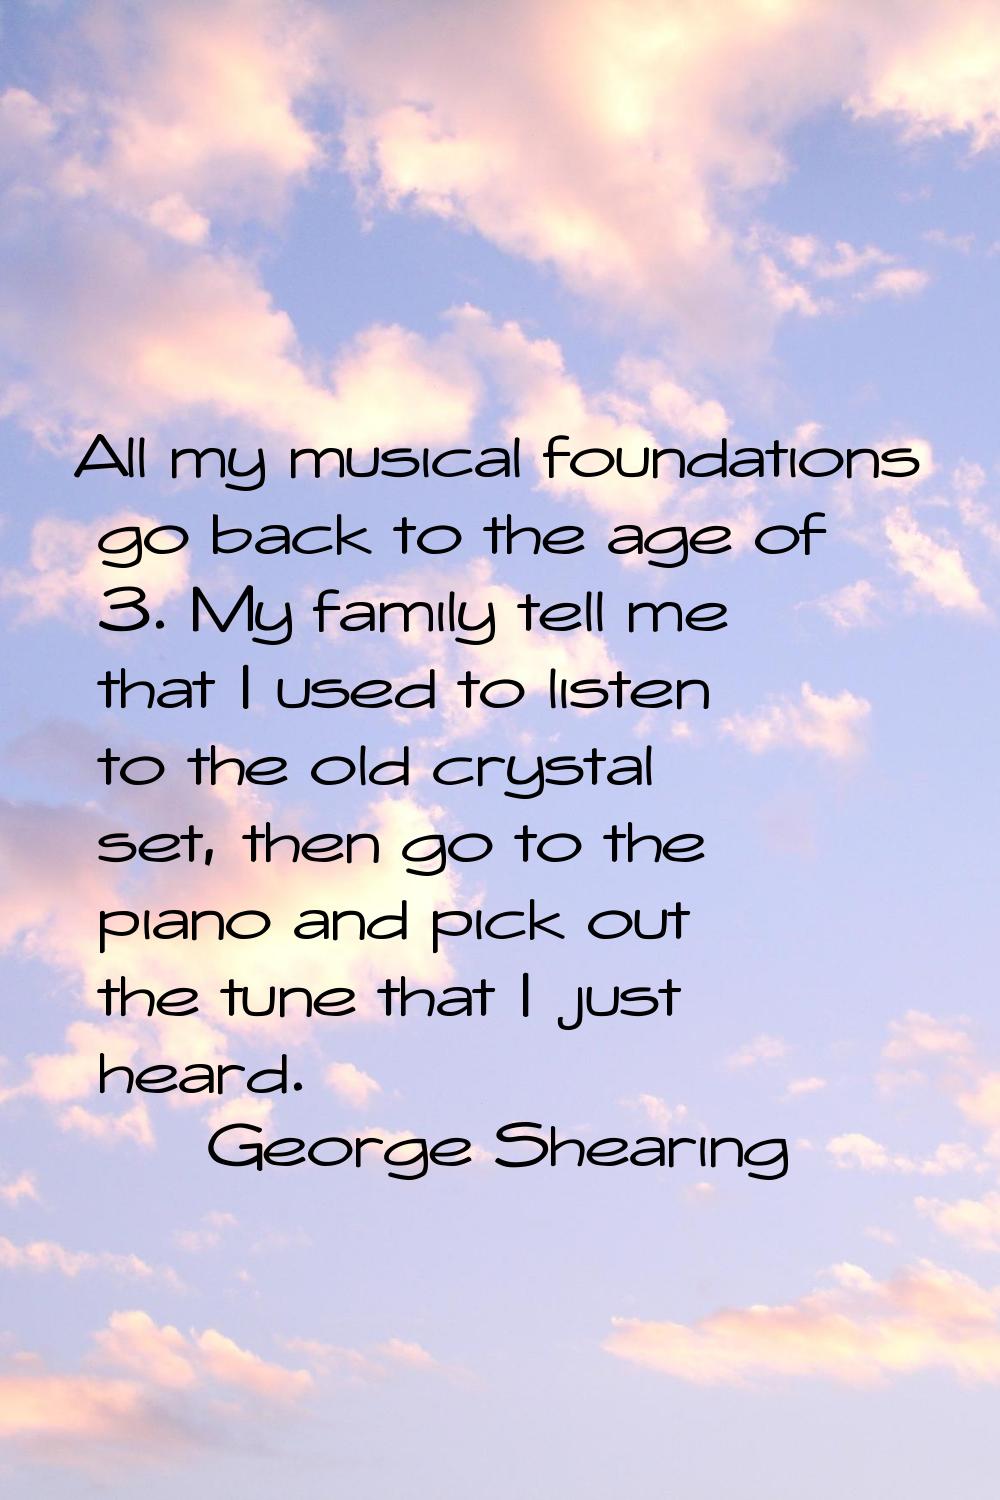 All my musical foundations go back to the age of 3. My family tell me that I used to listen to the 